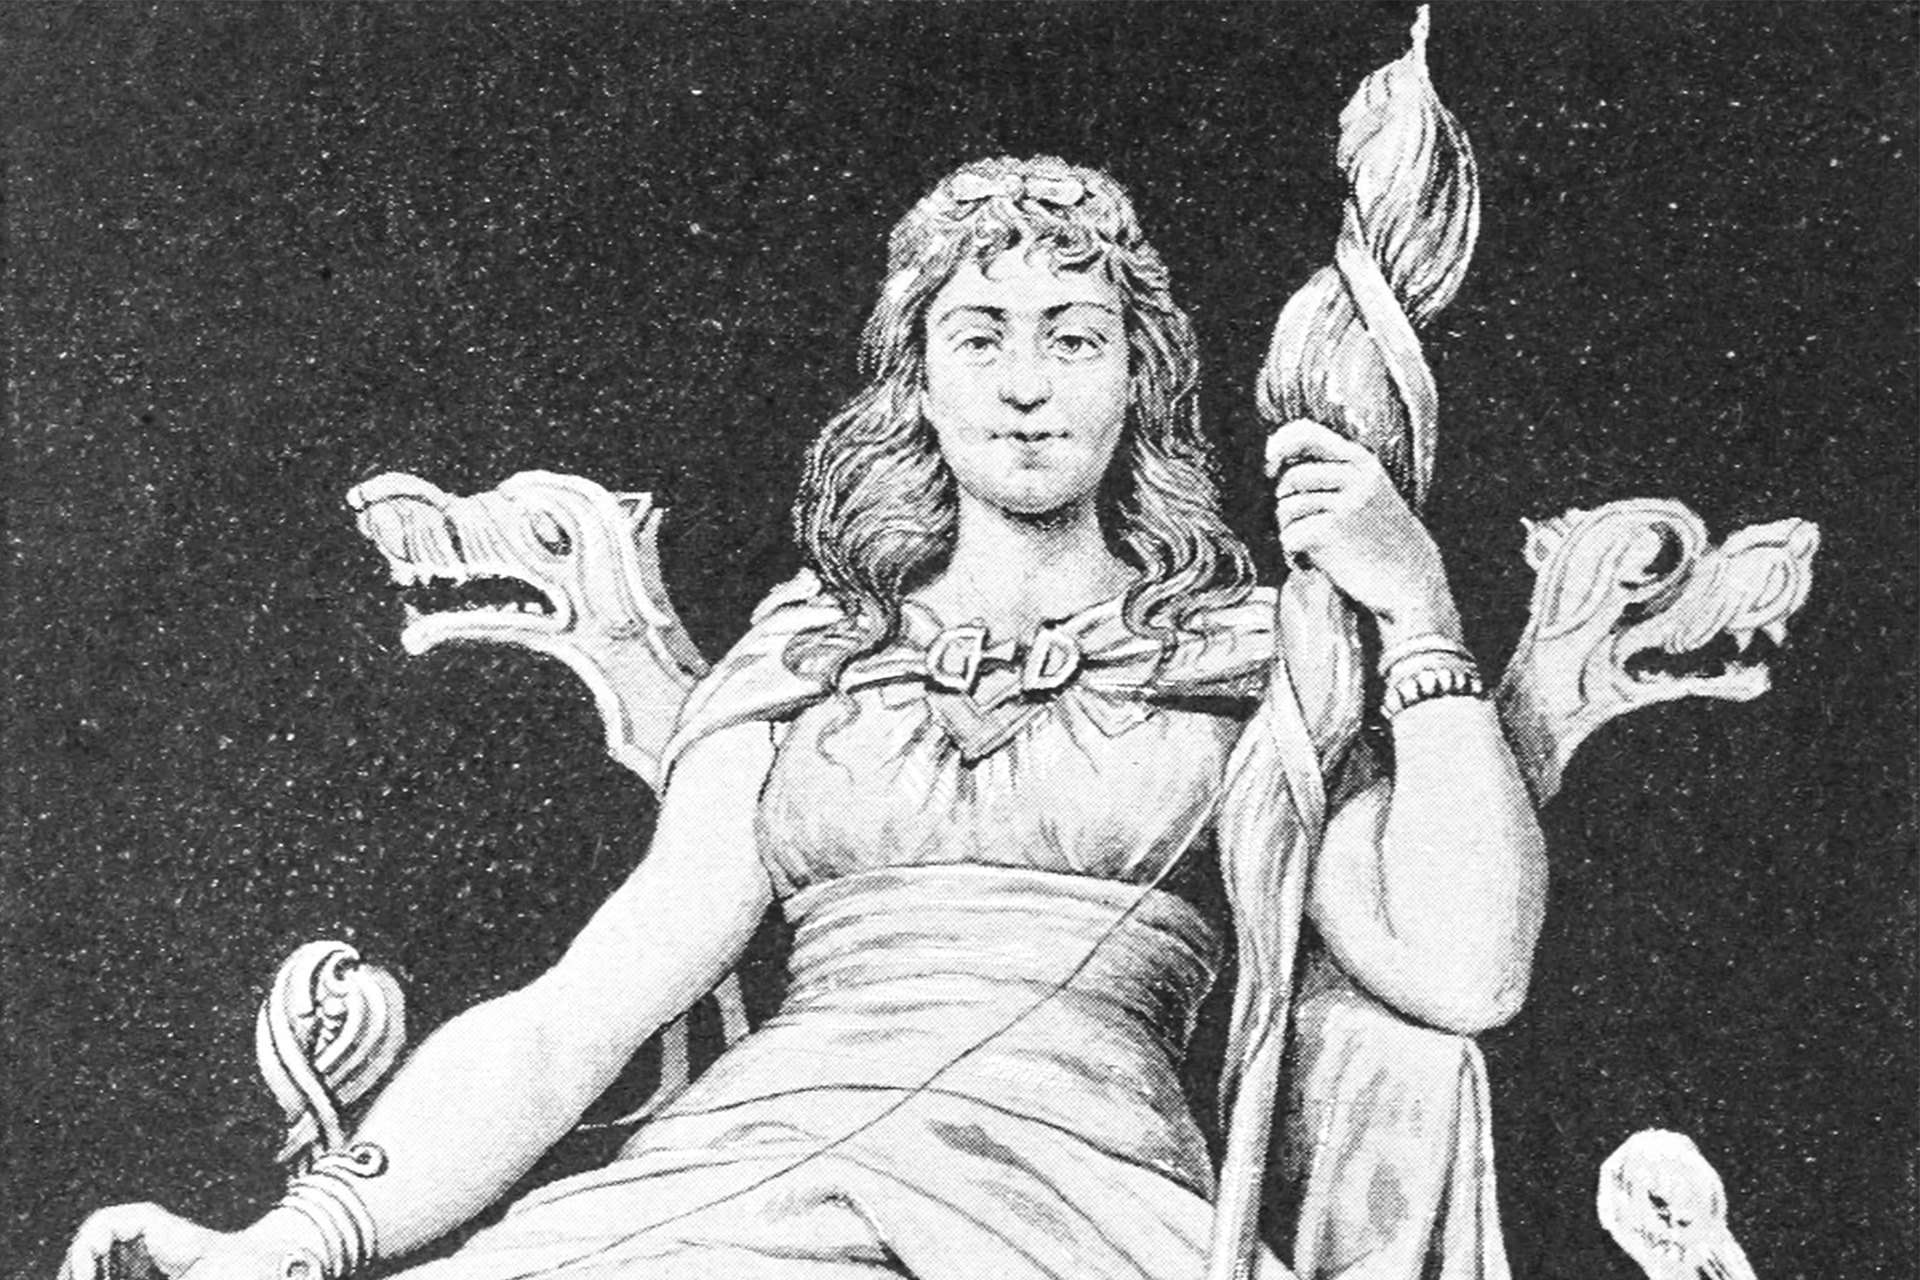 Frigg: The Norse Goddess of Love and Wisdom